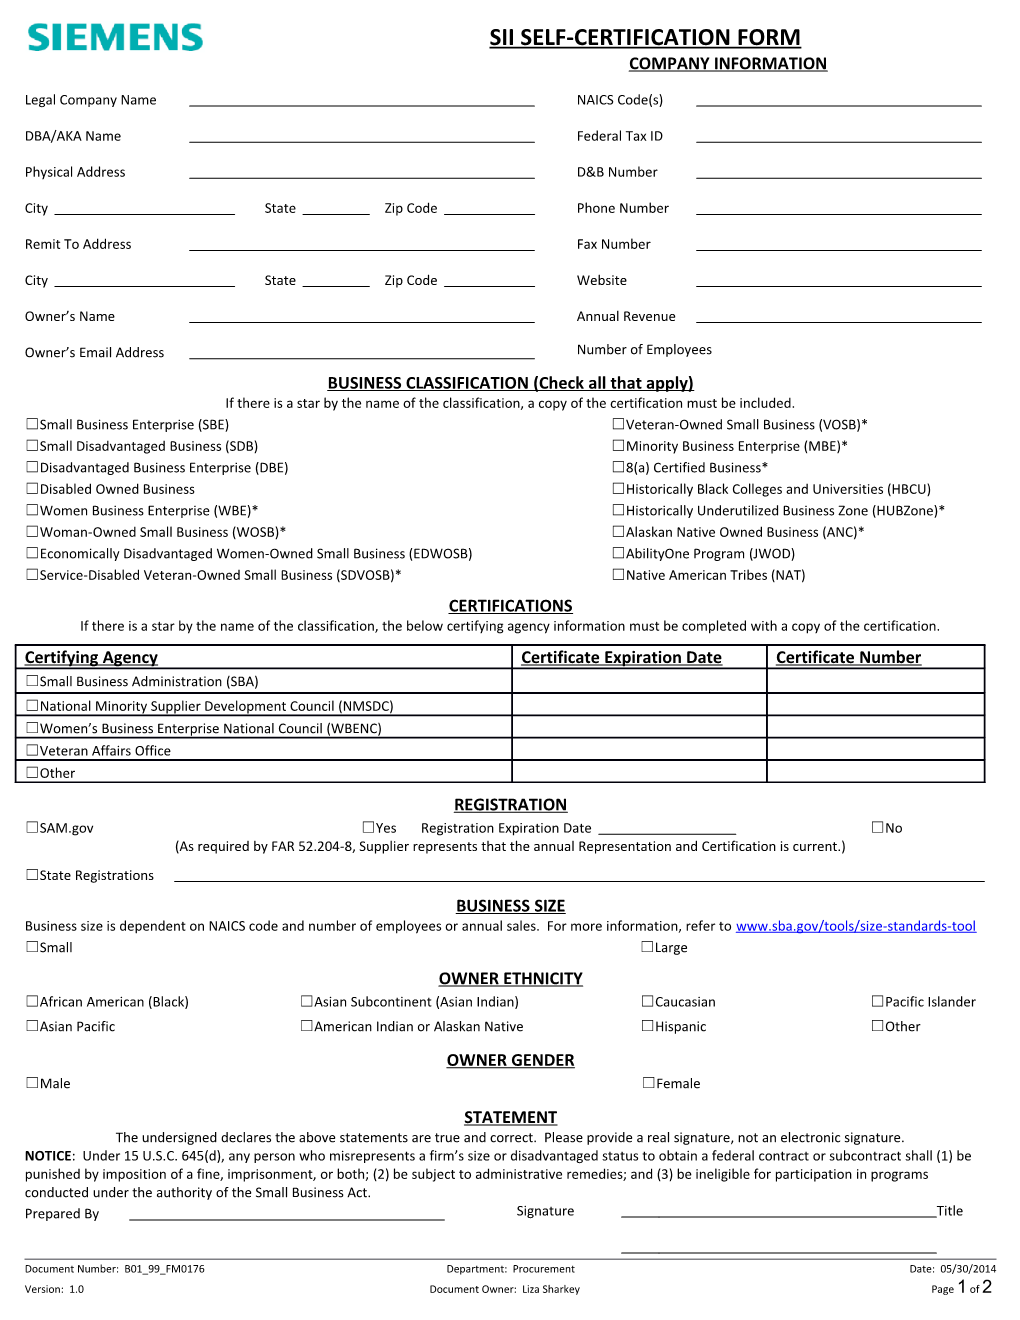 SII Self-Certification Form